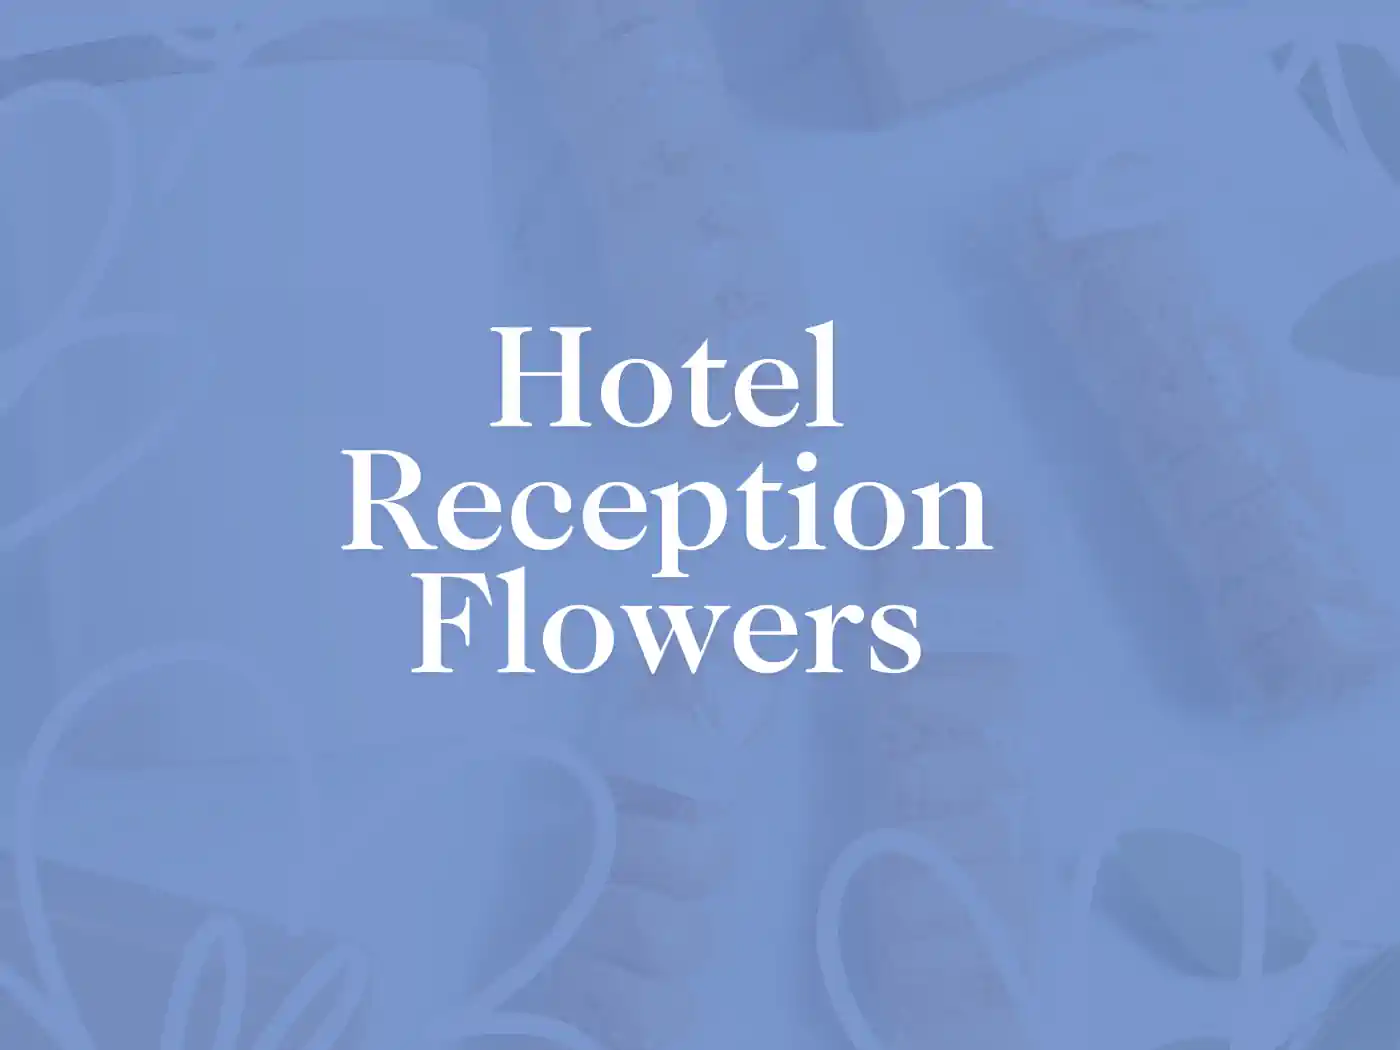 Hotel Reception Flowers' on a subtle floral patterned background. Fabulous Flowers and Gifts, Guest House and Hotel Gift Boxes Delivered with Heart.